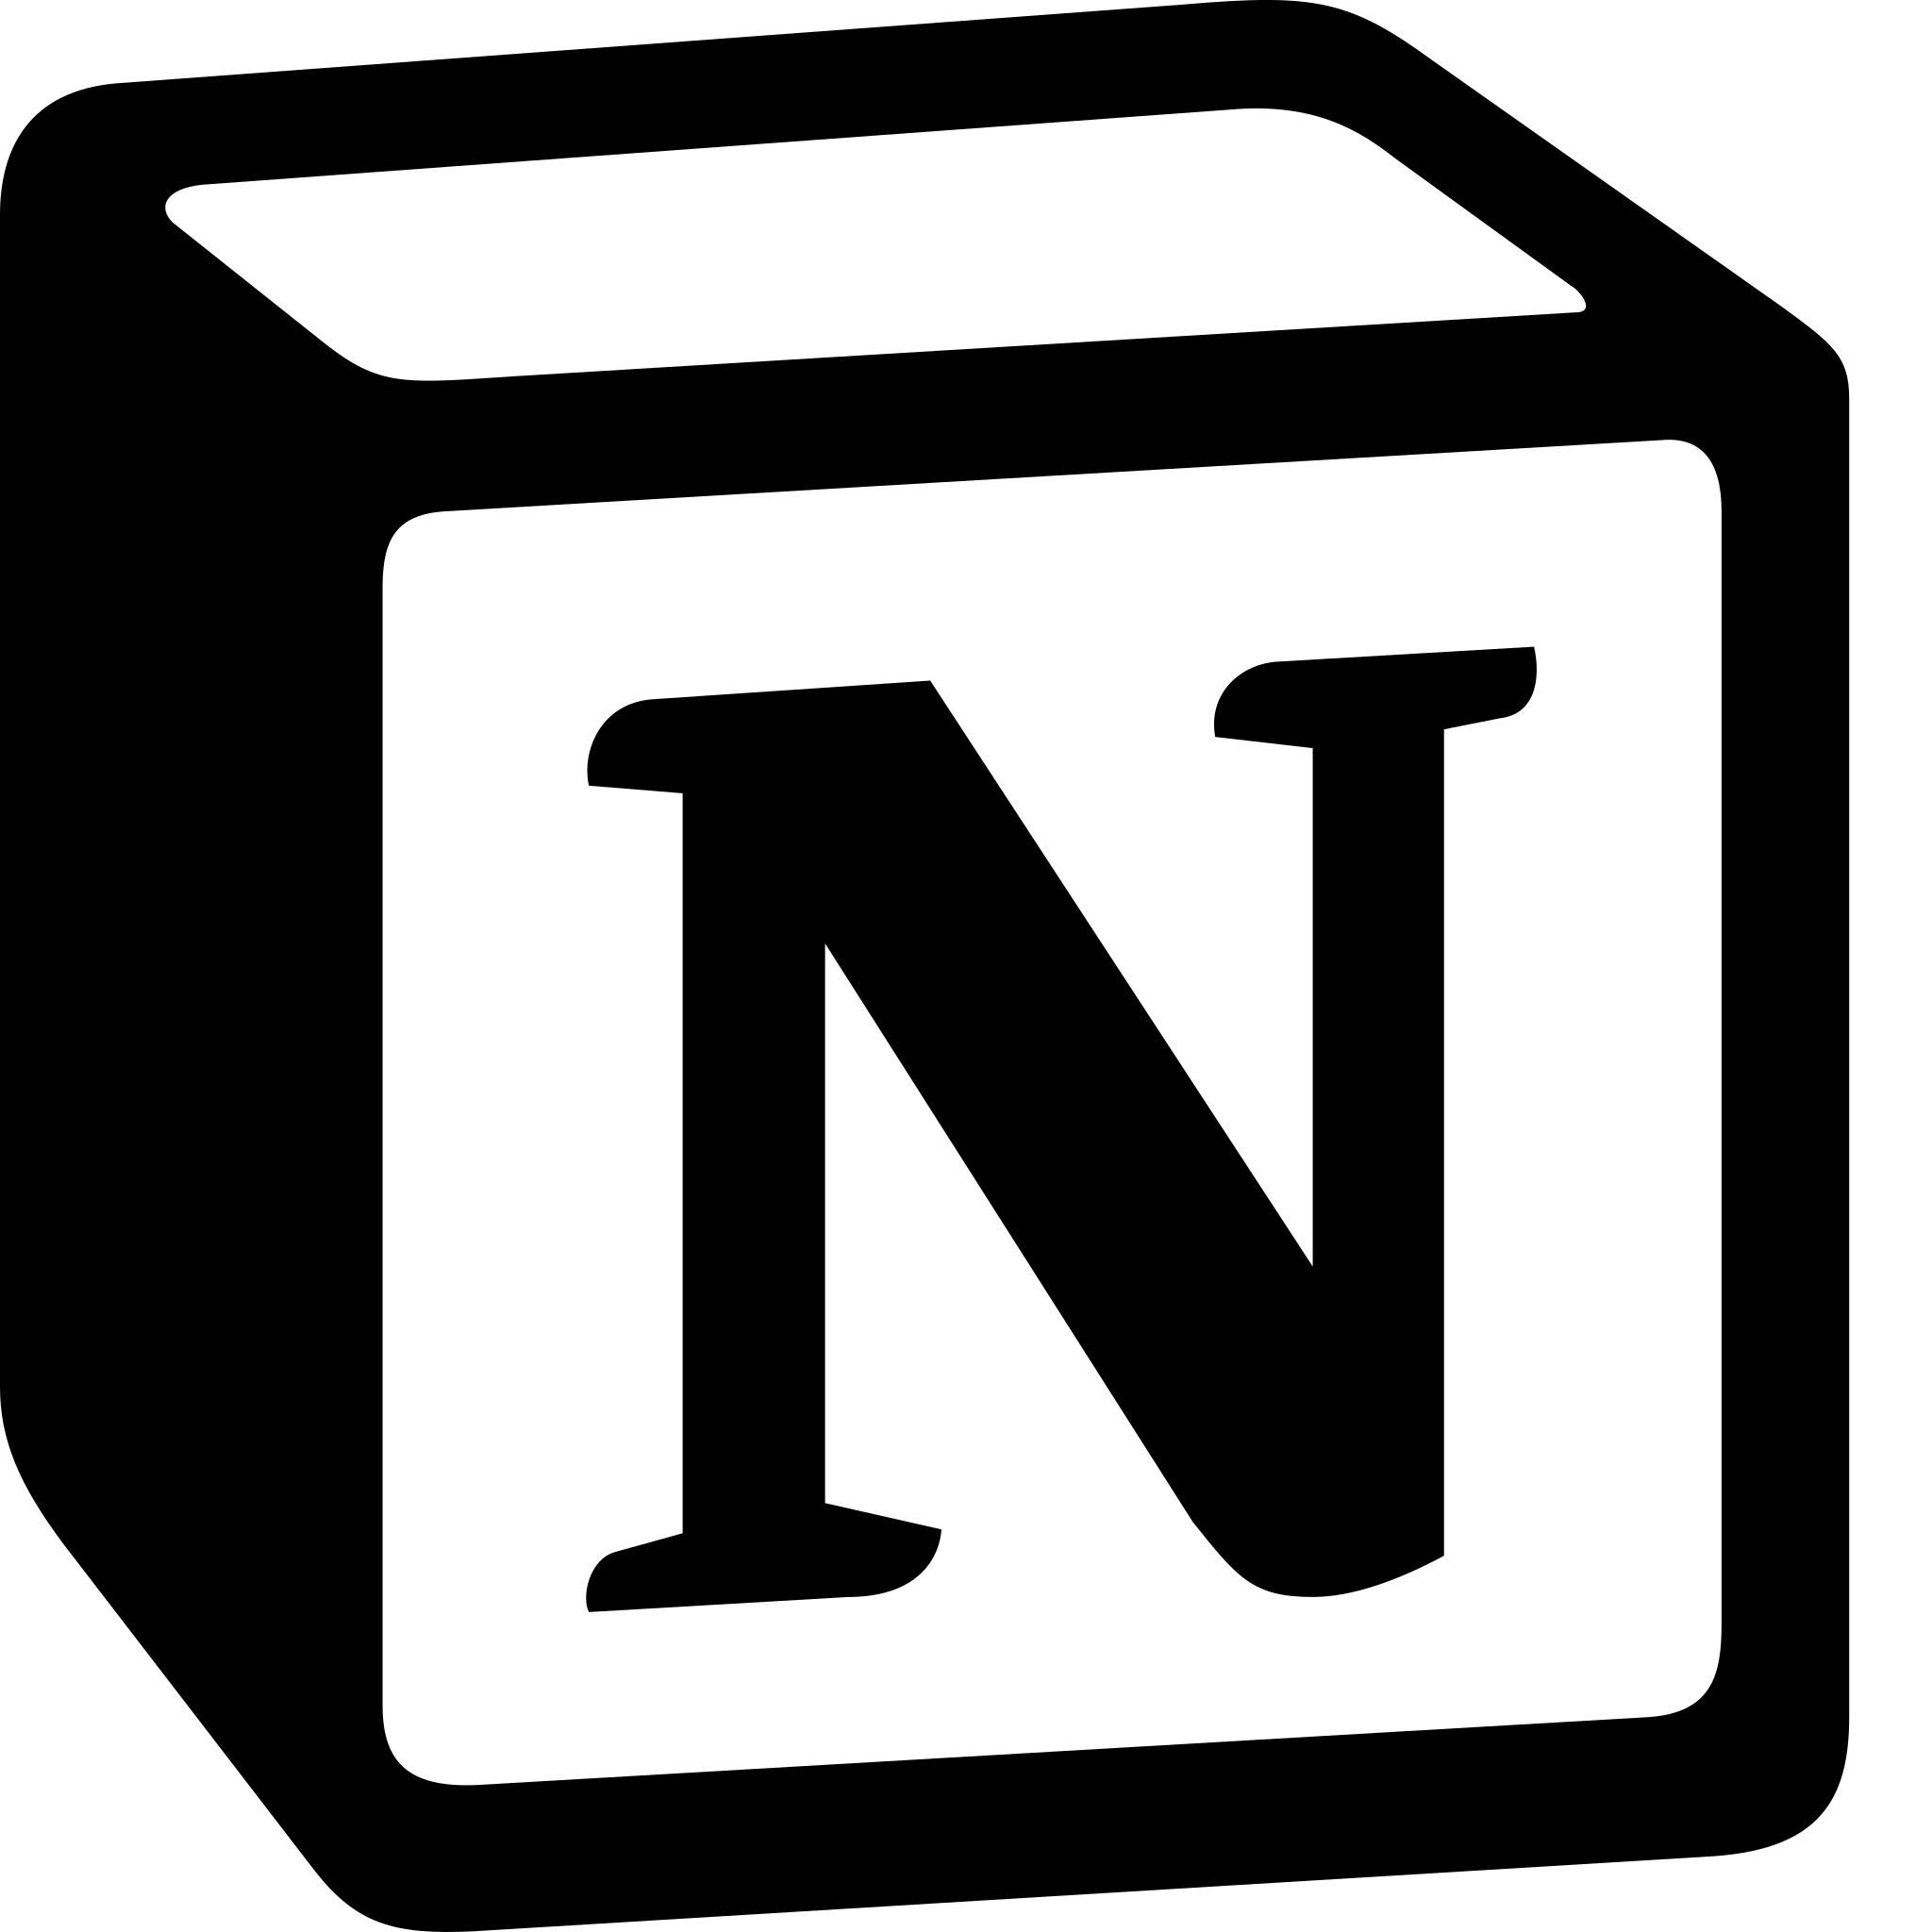 How to Use Notion for Personal?